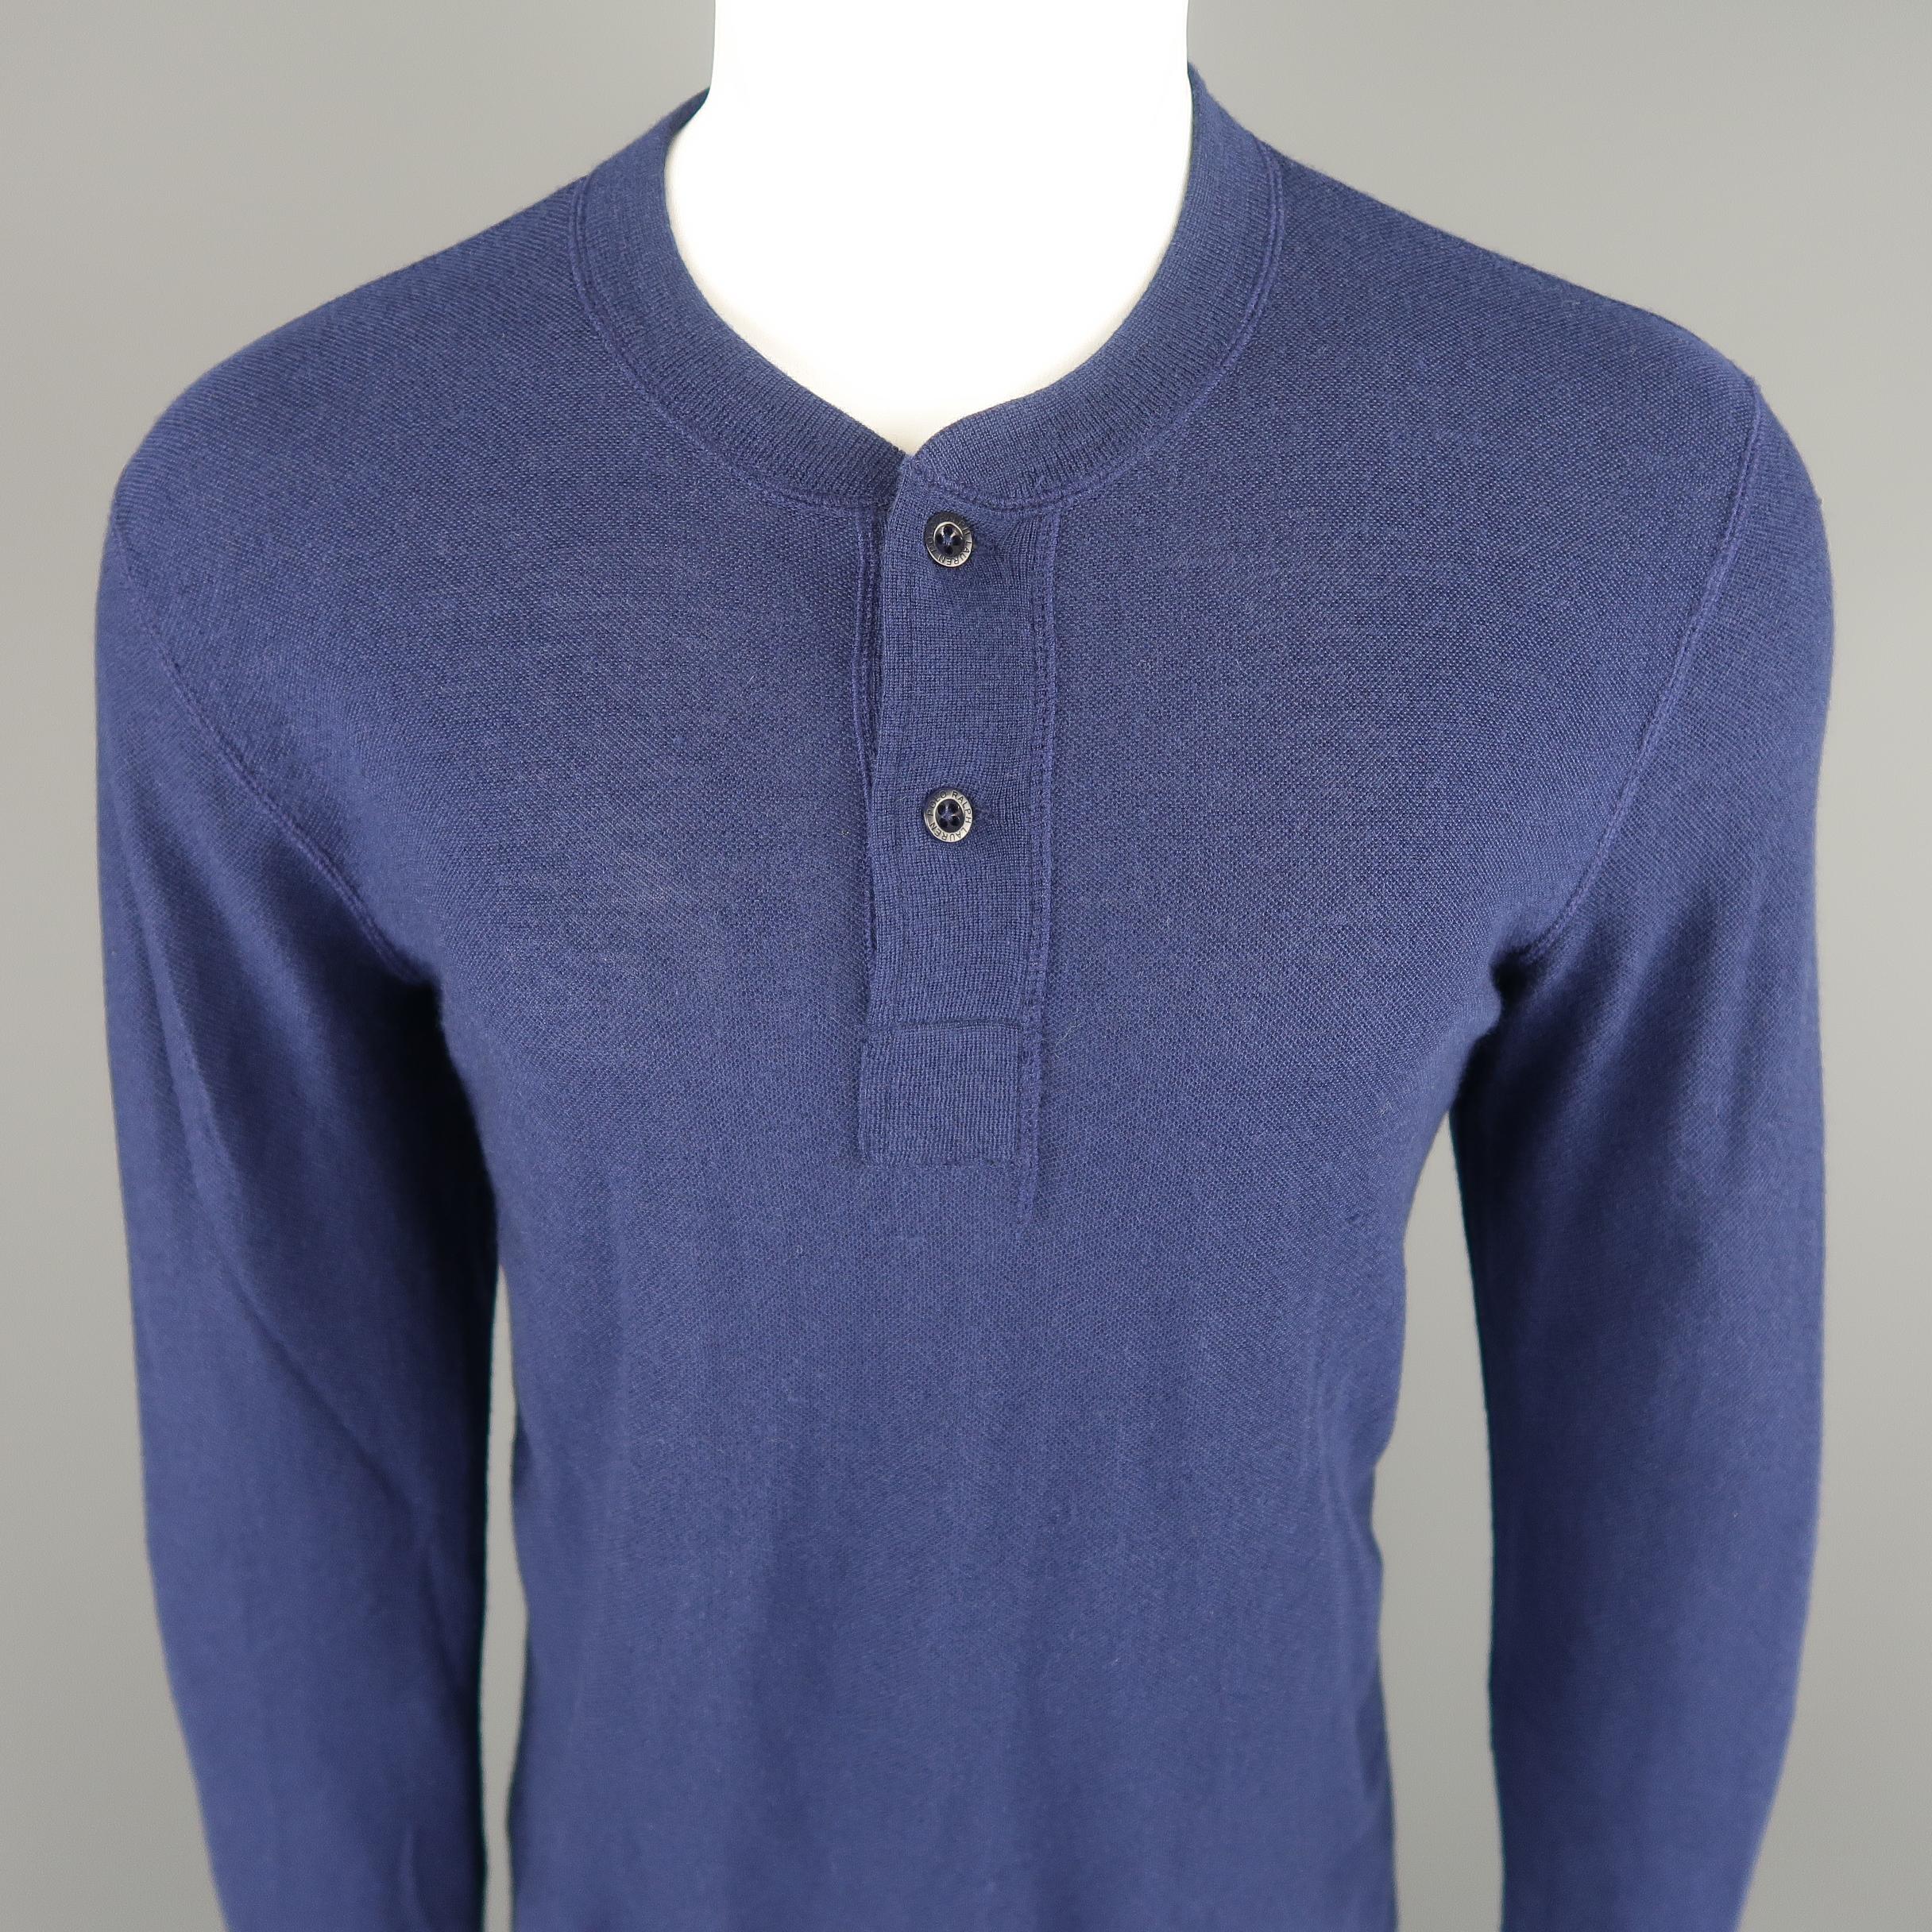 Polo By Ralph Lauren Size L sweater come in 100% Cashmere in a navy tone knit, with a henley neck and ribbed cuff and waistband.
 
Fair Pre-Owned Condition.
Marked: L
 
Measurements:
 
Shoulder: 19 in.
Chest: 22 in.
Sleeve: 31 in.
Length: 28.5 in.